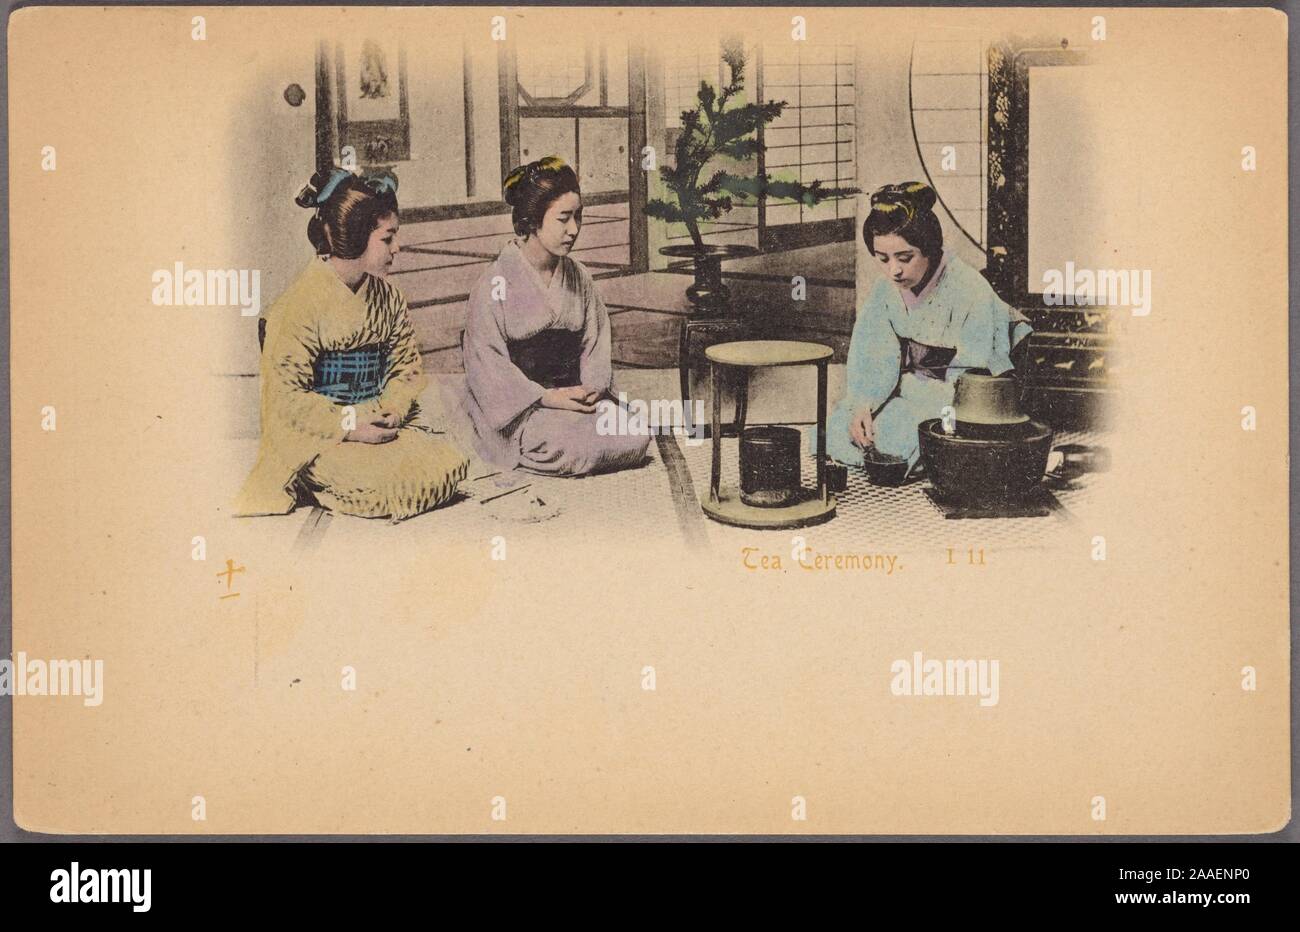 Illustrated postcard of a group of women dressed in traditional Japanese kimono, kneeling on the floor preparing tea for the traditional Japanese tea ceremony, Japan, 1920. From the New York Public Library. () Stock Photo